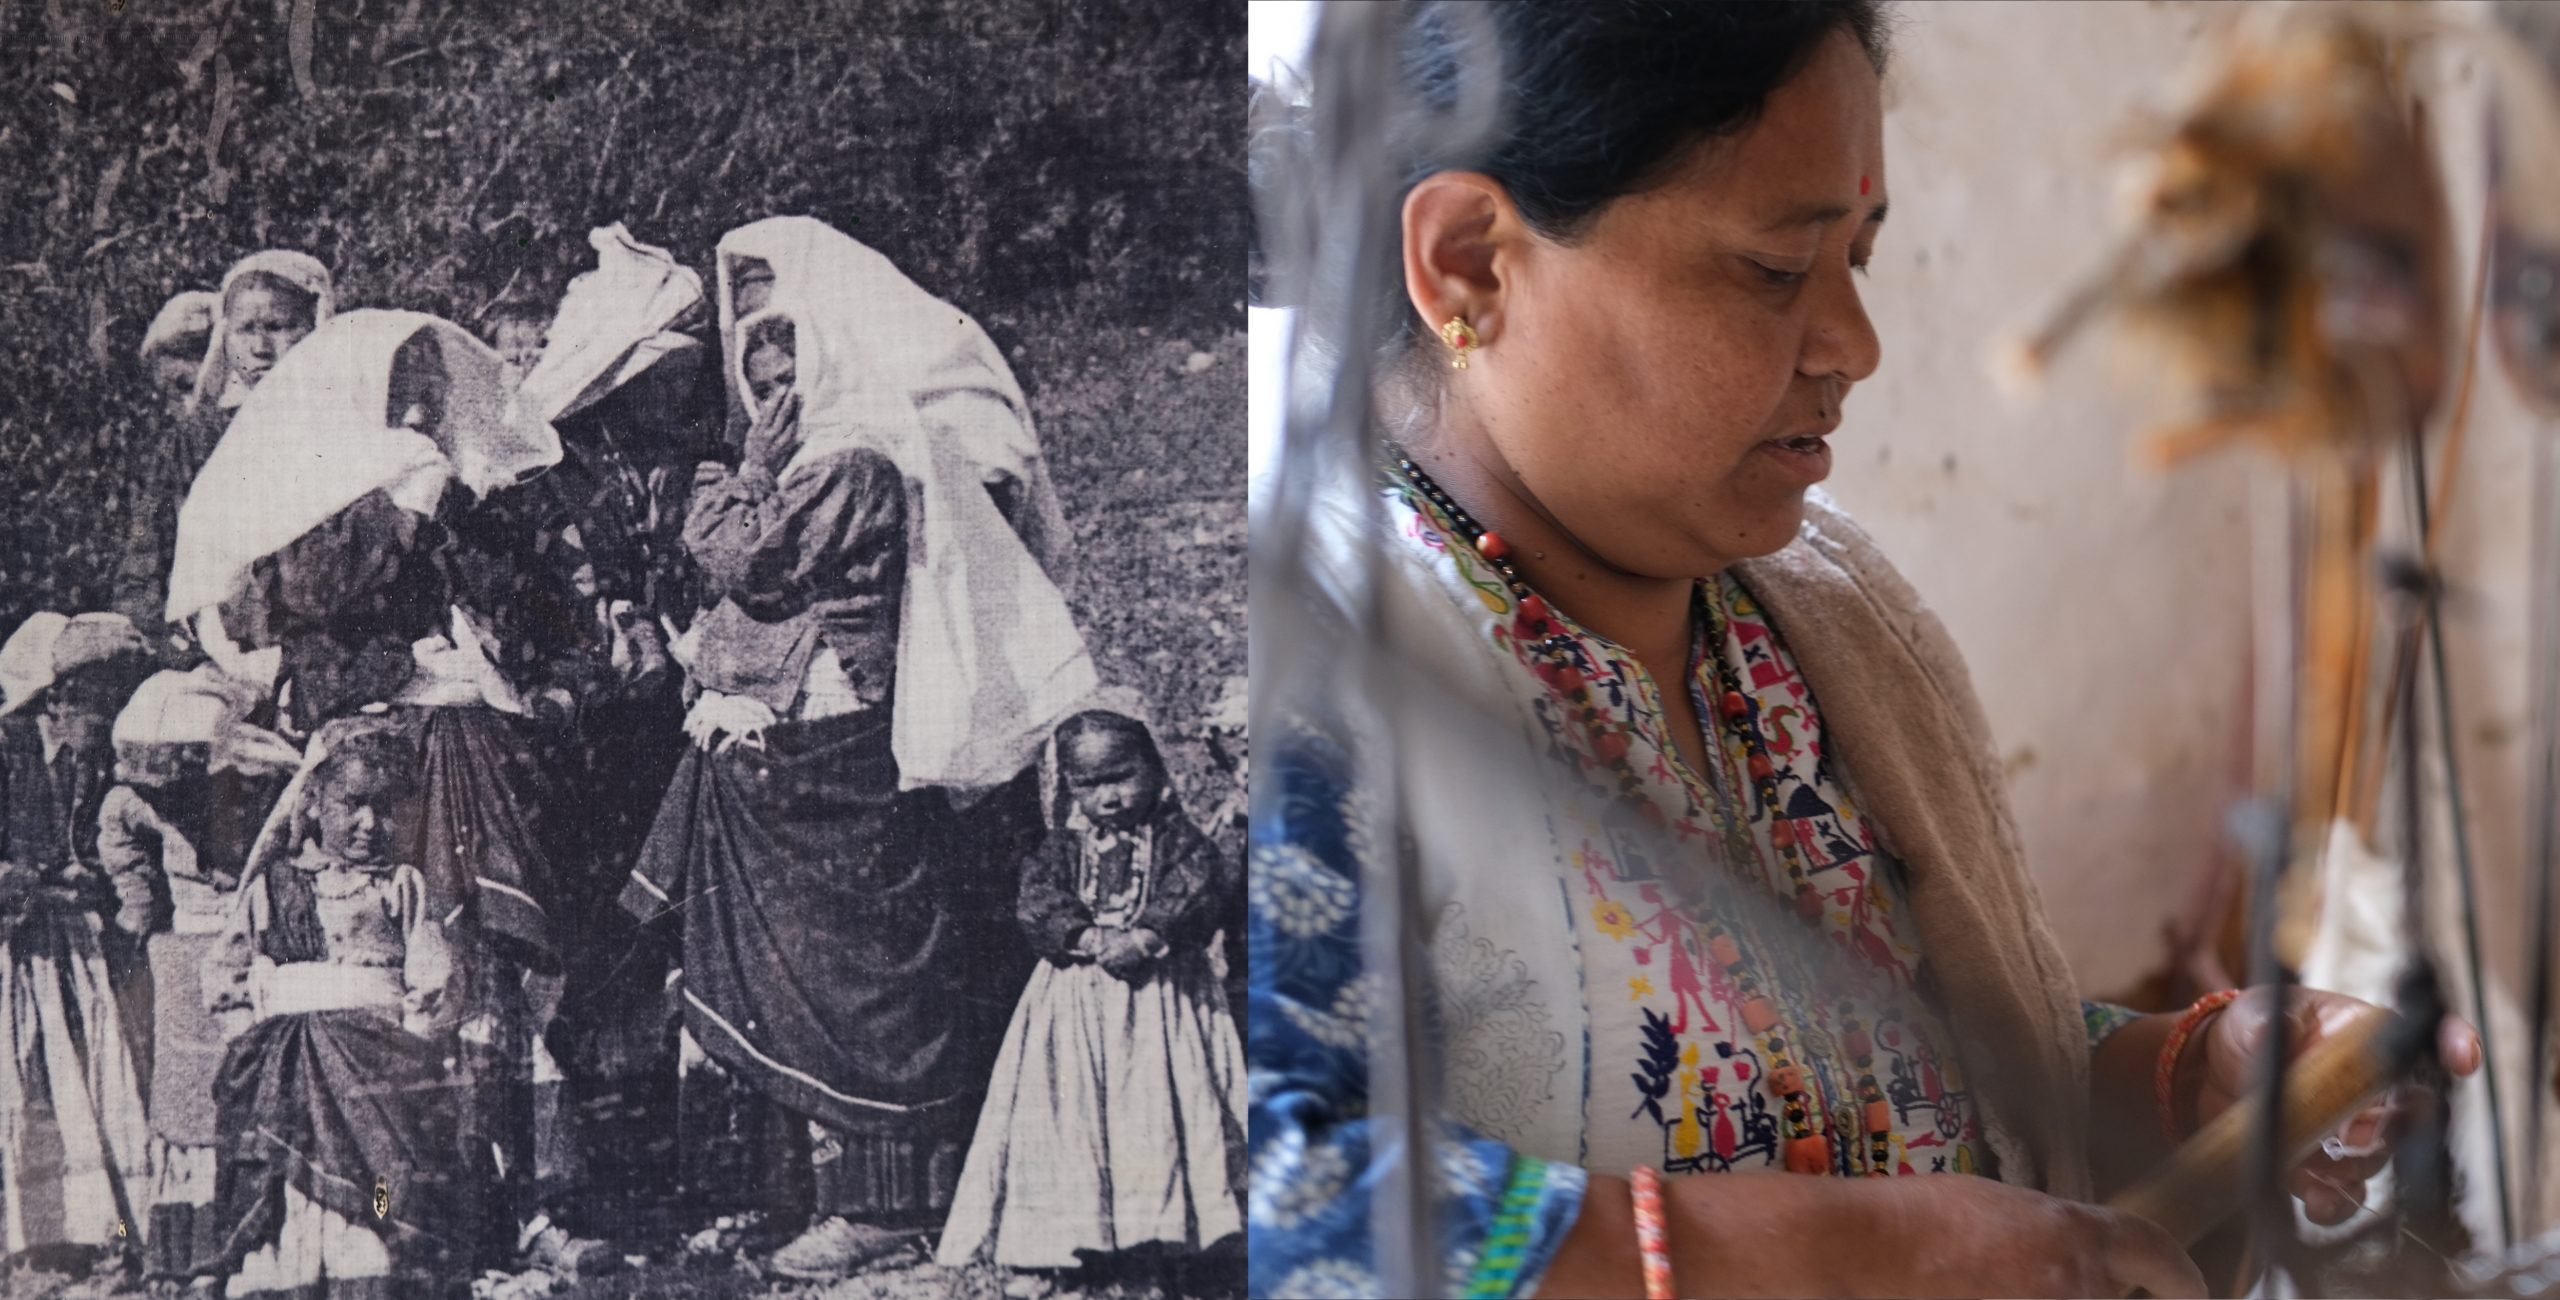 <p><span style="font-weight: 400;">Changing lives: An archive photograph (left) of women wearing traditional festival attire in Milam village in what is now Uttarakhand; Damyanti Pangti (right), a weaver in Darkot village works on a traditional ‘khaddi’, or loom, in June 2022. (Image: Shikha Tripathi / The Third Pole)</span></p>